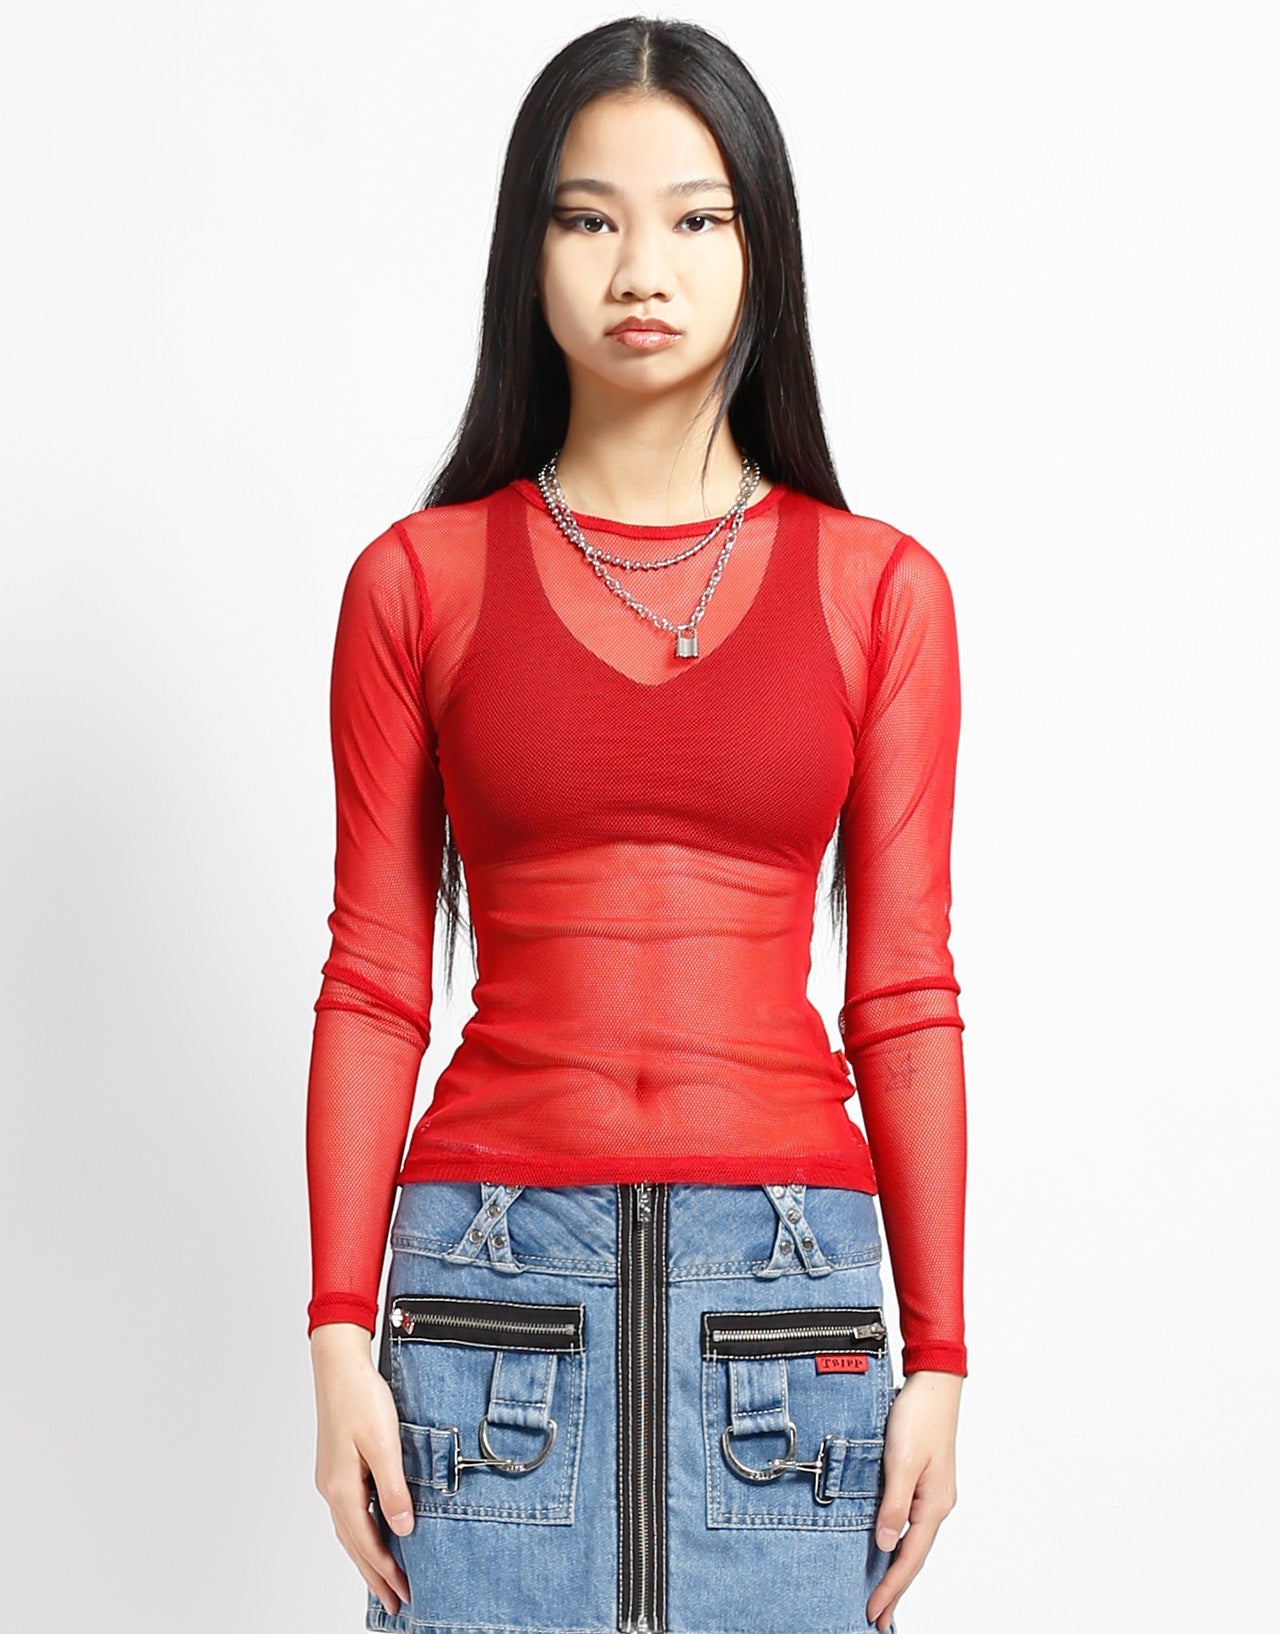 A model wearing the red Long Sleeve Baby Doll Fishnet Shirt with black bra and blue jean skirt, front view.